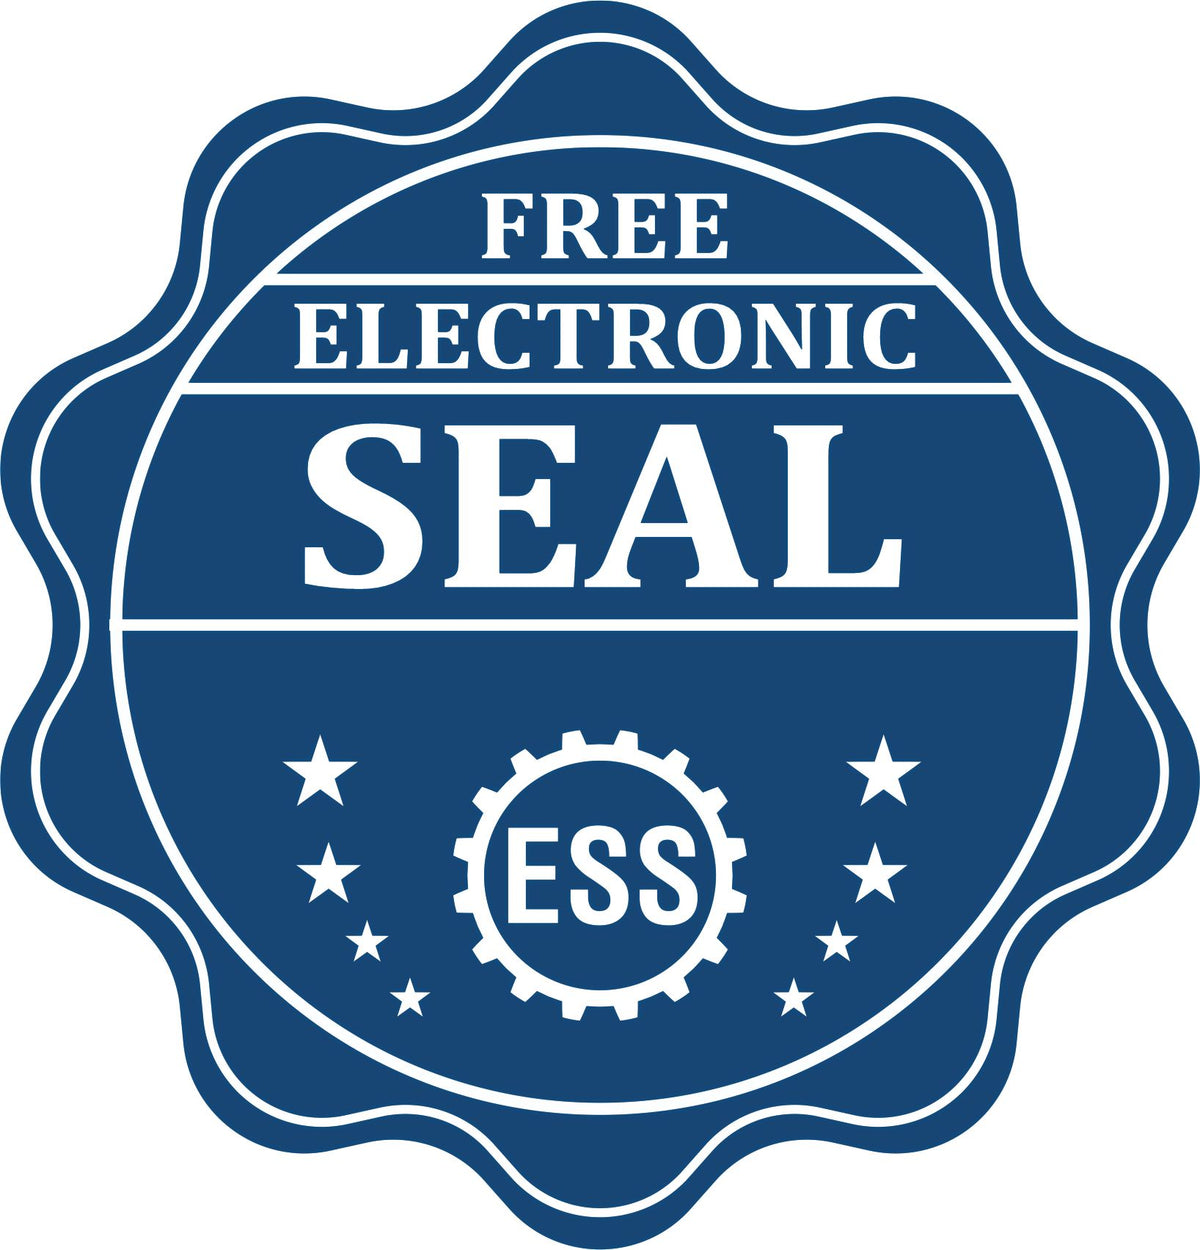 A badge showing a free electronic seal for the Gift Nevada Engineer Seal with stars and the ESS gear on the emblem.